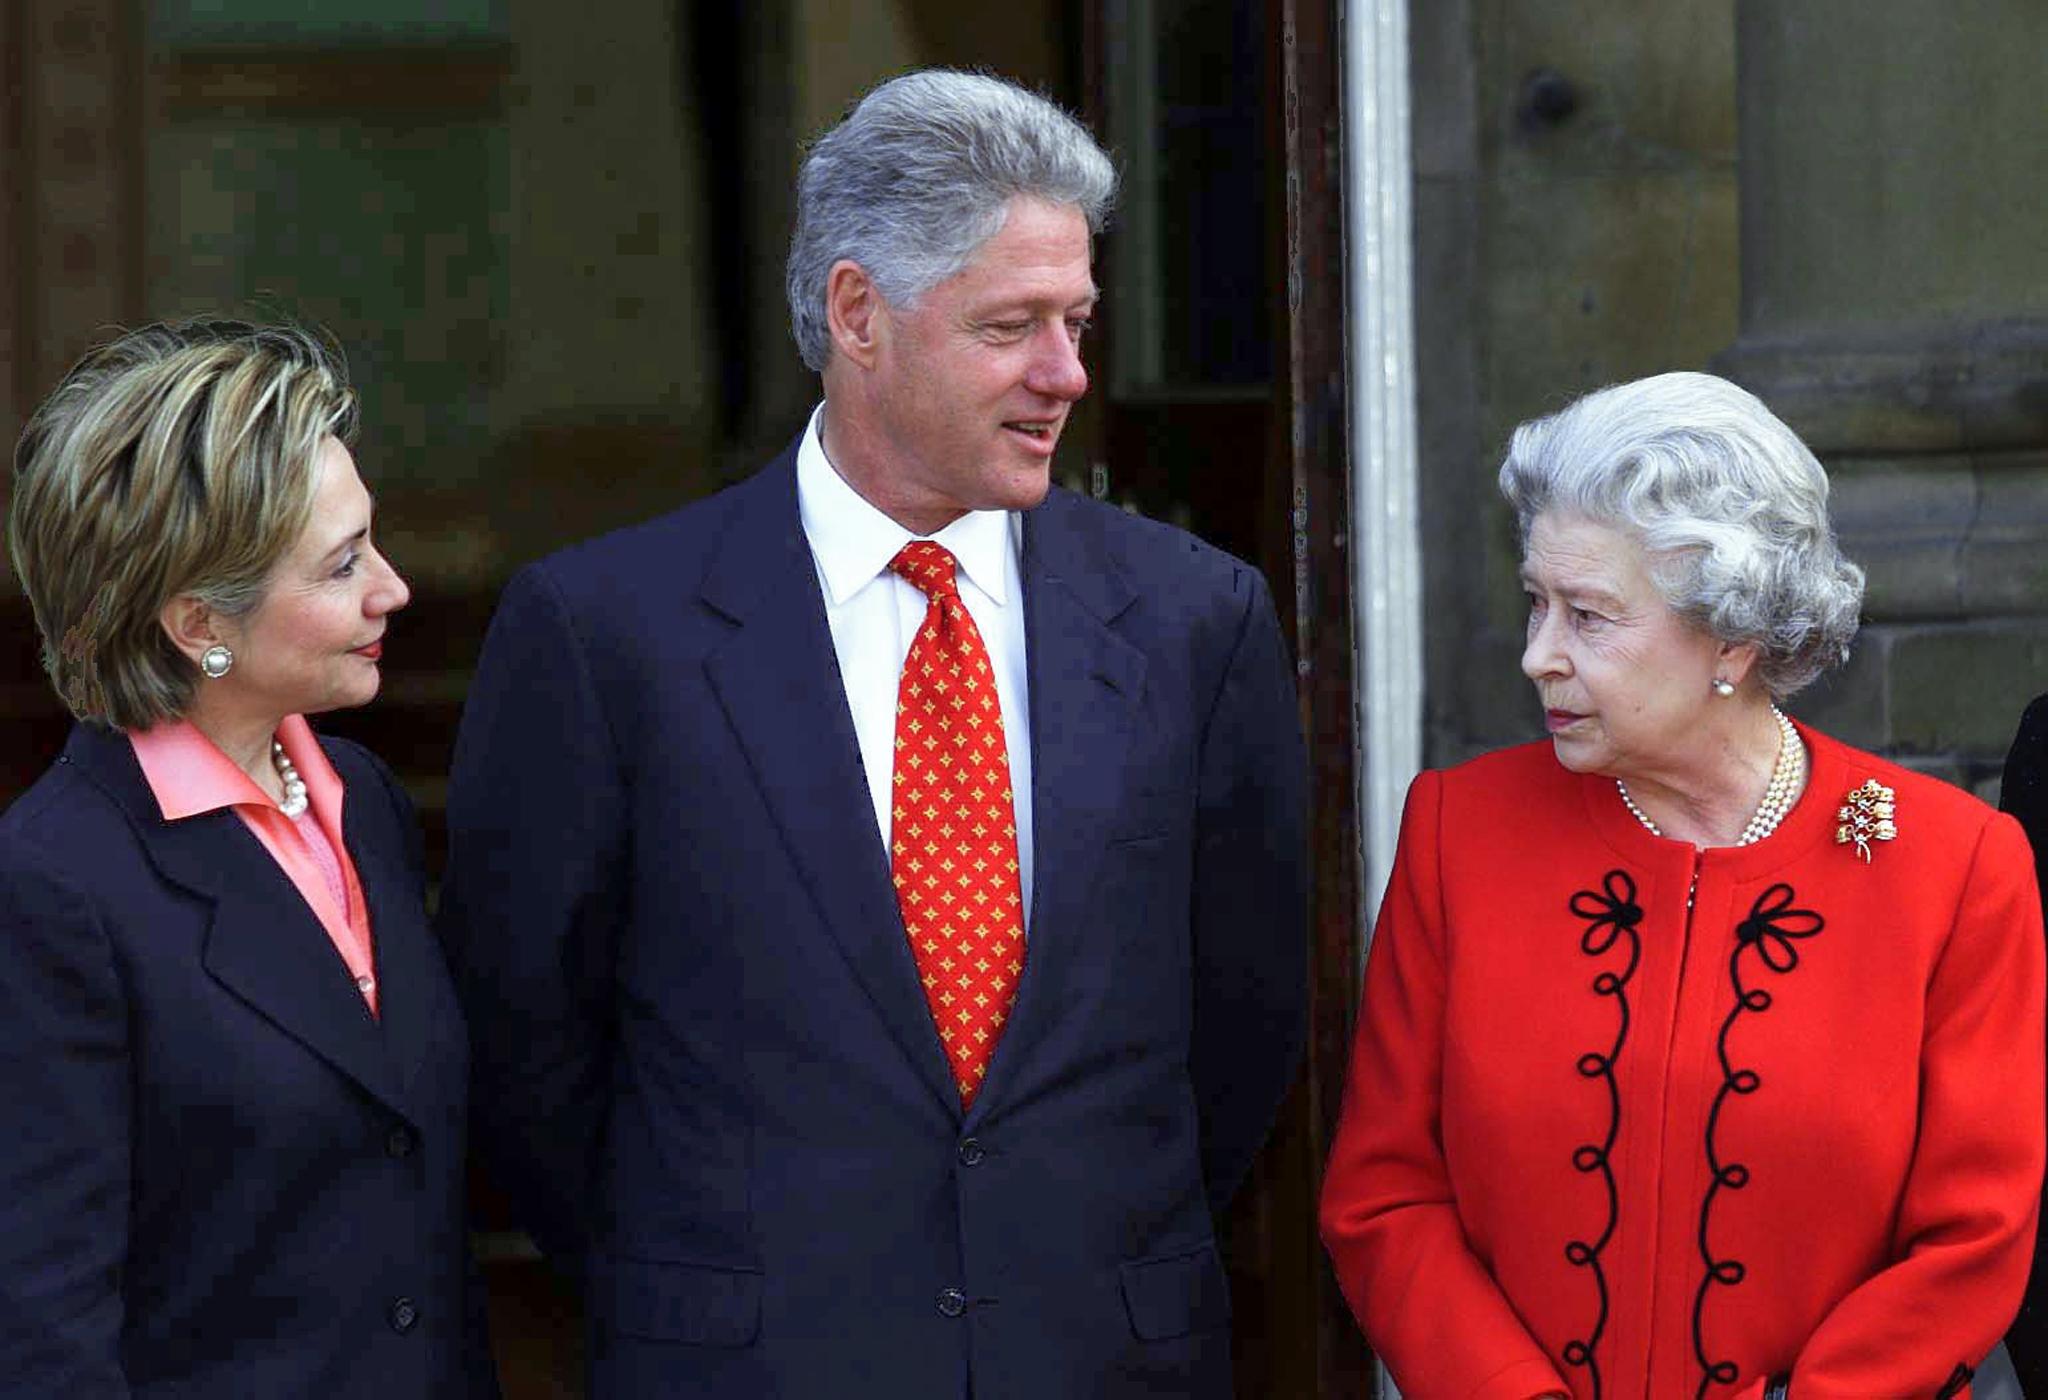 Bill and Hillary Clinton met the Queen on a visit to the UK